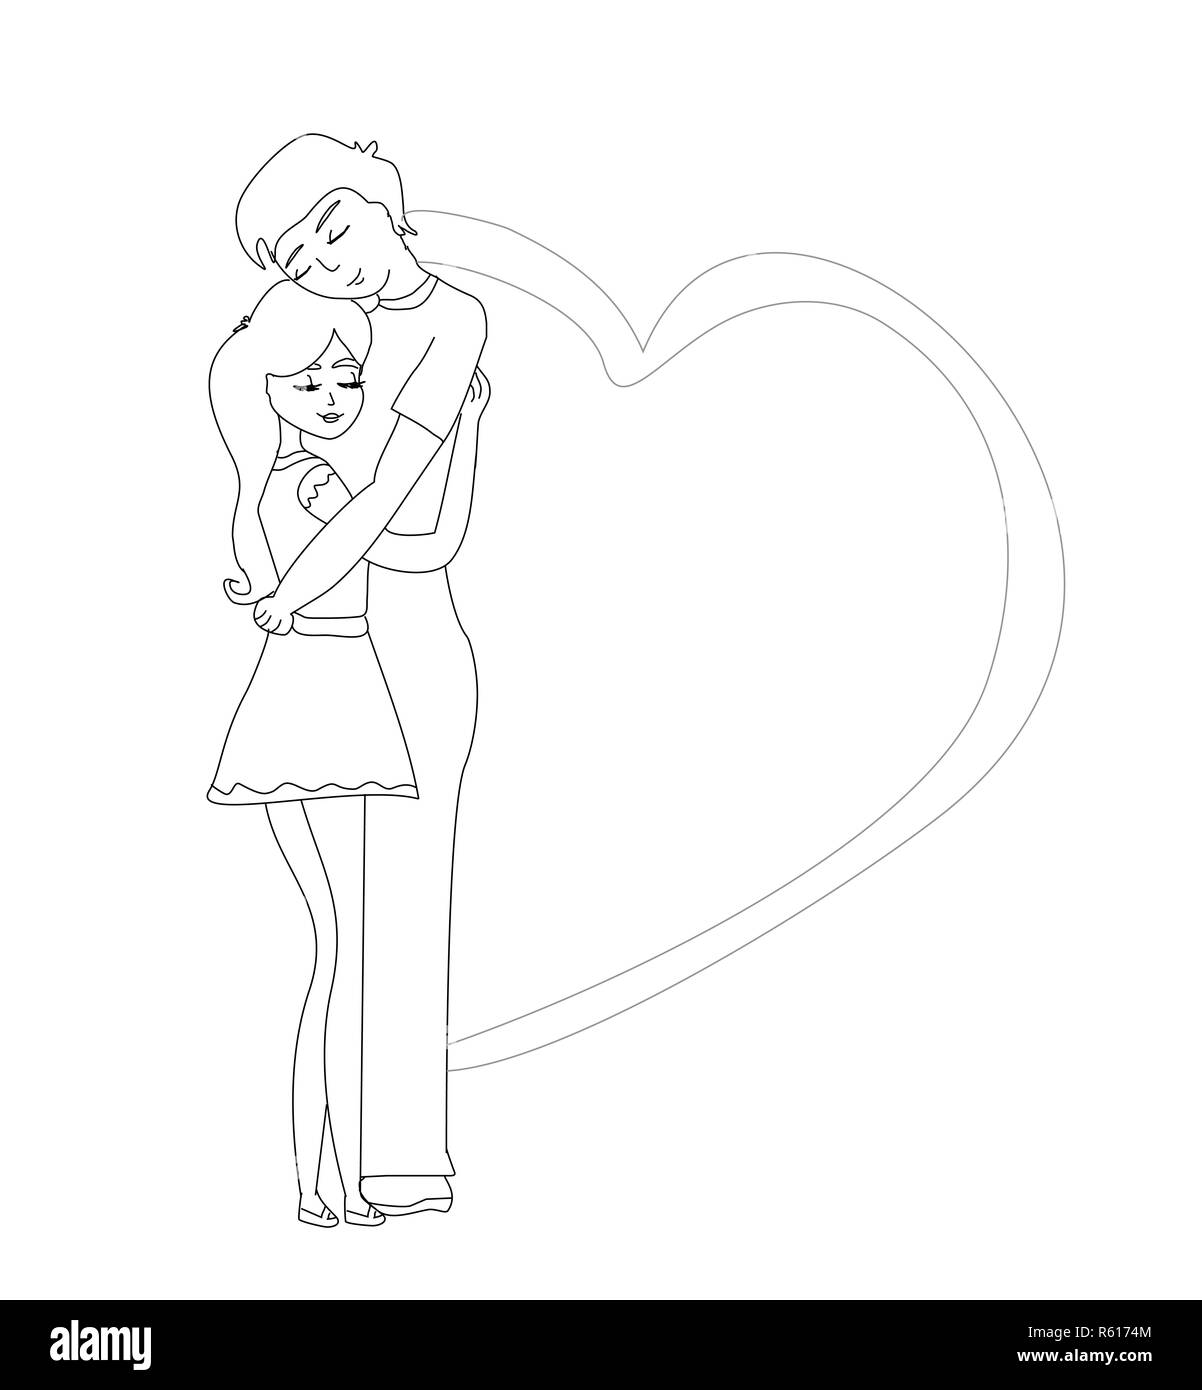 Relationship Drawings Capture Intimate Moments Between Couple